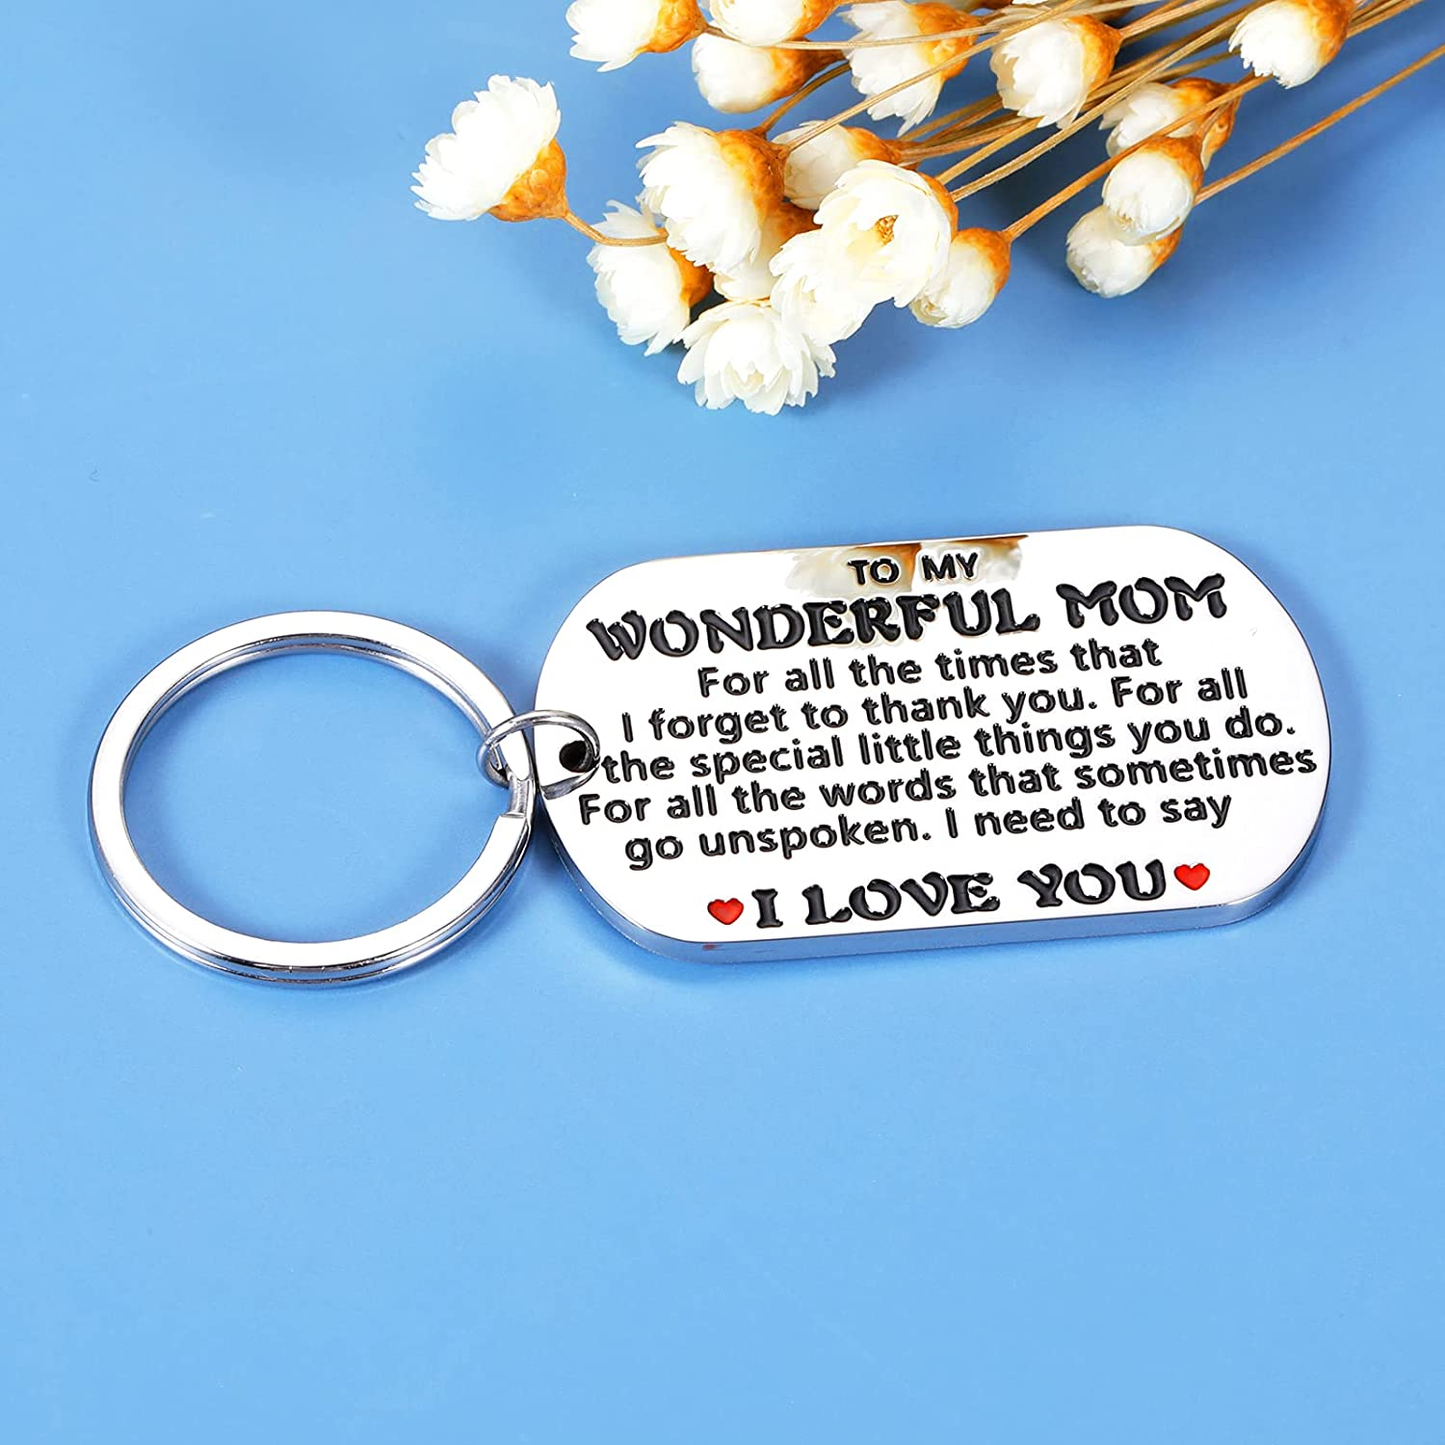 Mom Keychain Gifts from Daughter Son to Mom Mother Mothers' Day Christmas Valentine'S Day Thanksgiving Day Gifts for Stepmom Stepmother Godmother Mother in Law Mother of the Bride Groom